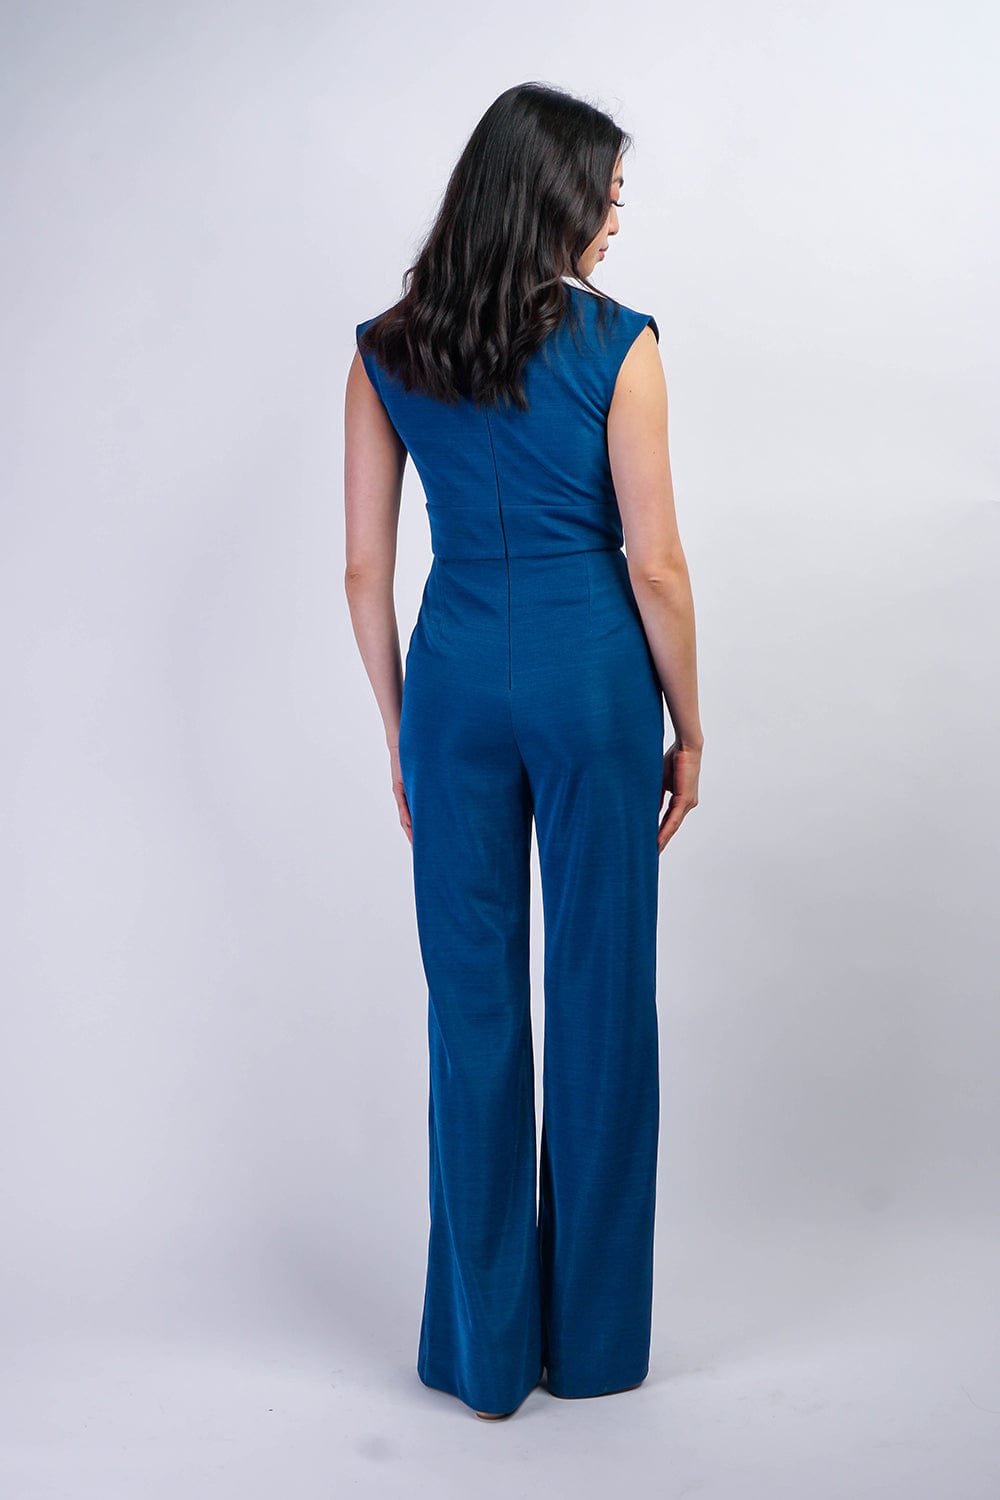 Chloe Dao JUMPSUITS & ROMPERS Saphire Blue Luxe V Neck Aiden Jumpsuit